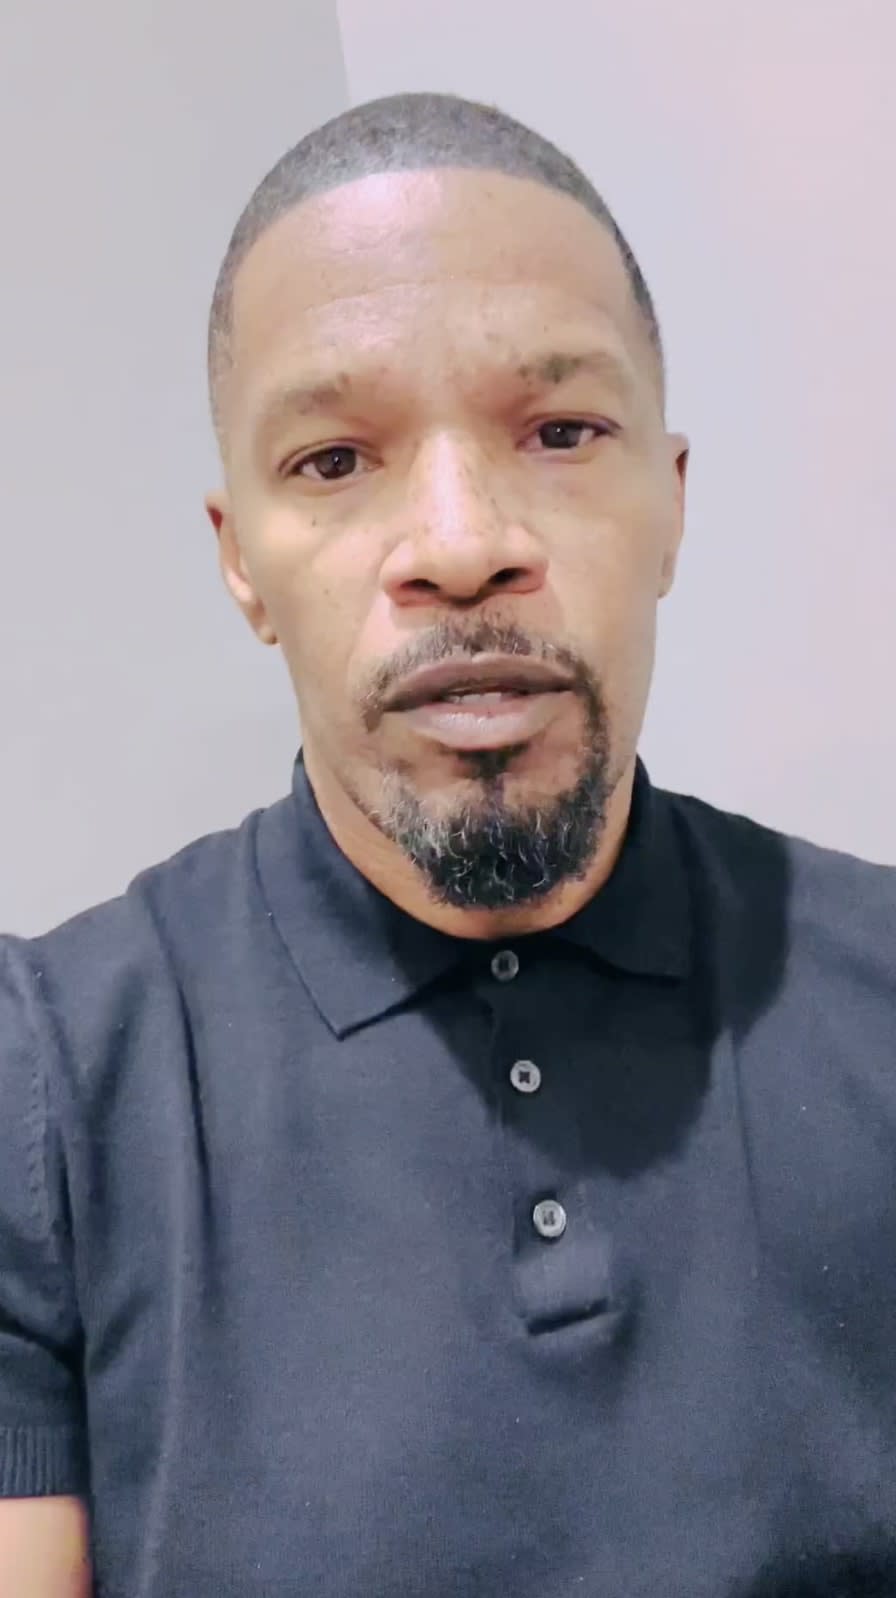 Jamie Foxx Breaks Silence After Medical Scare In New Video: ‘I’m On My Way Back’